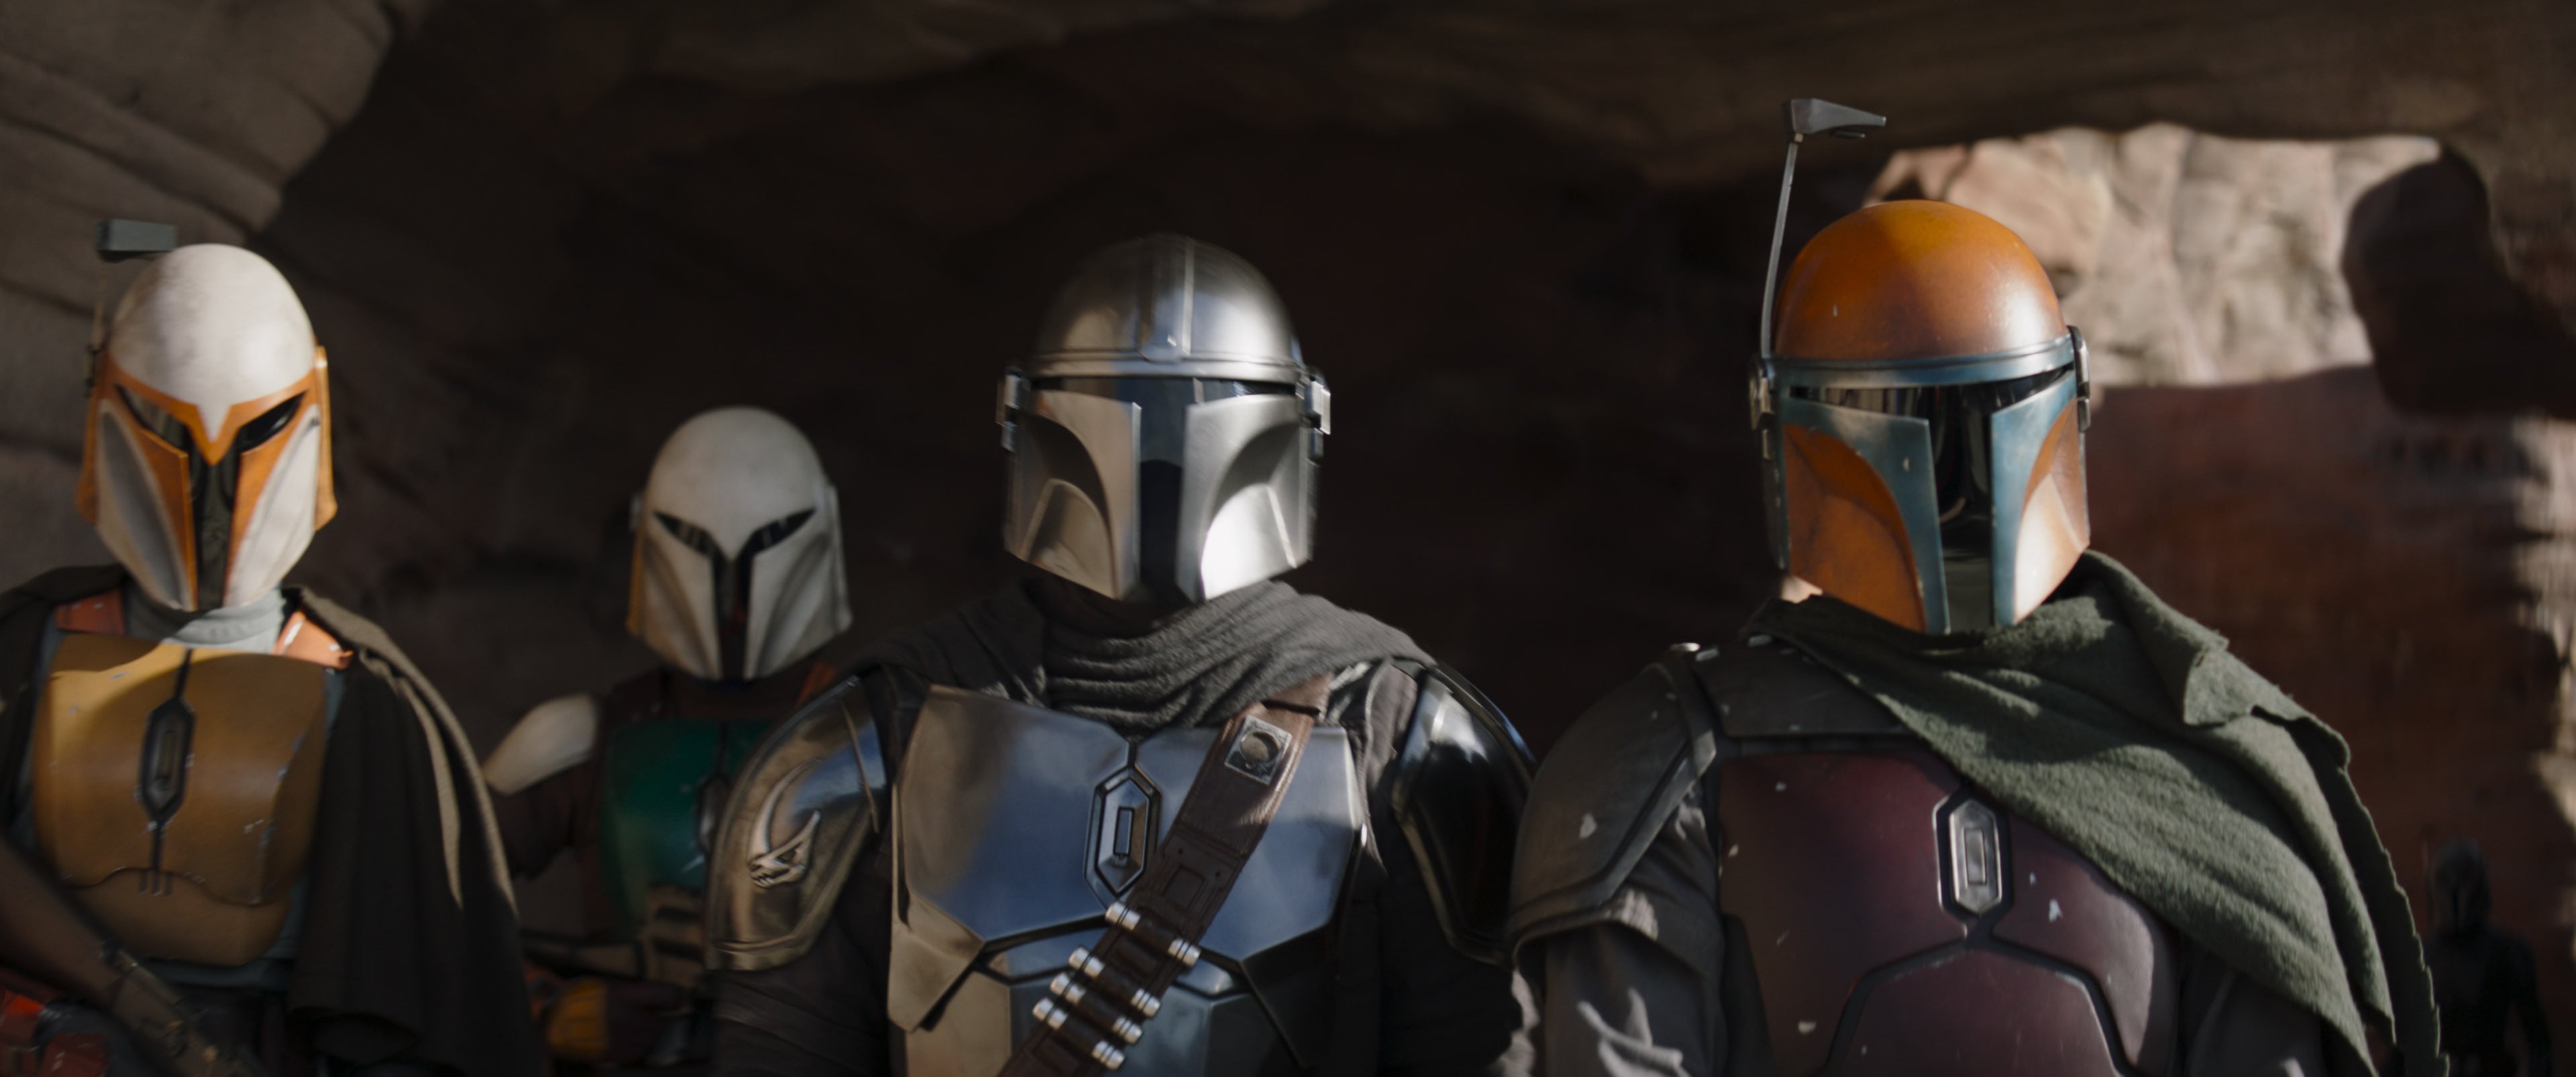 The Mandalorian Cast and Creators on the Season 3 Finale and